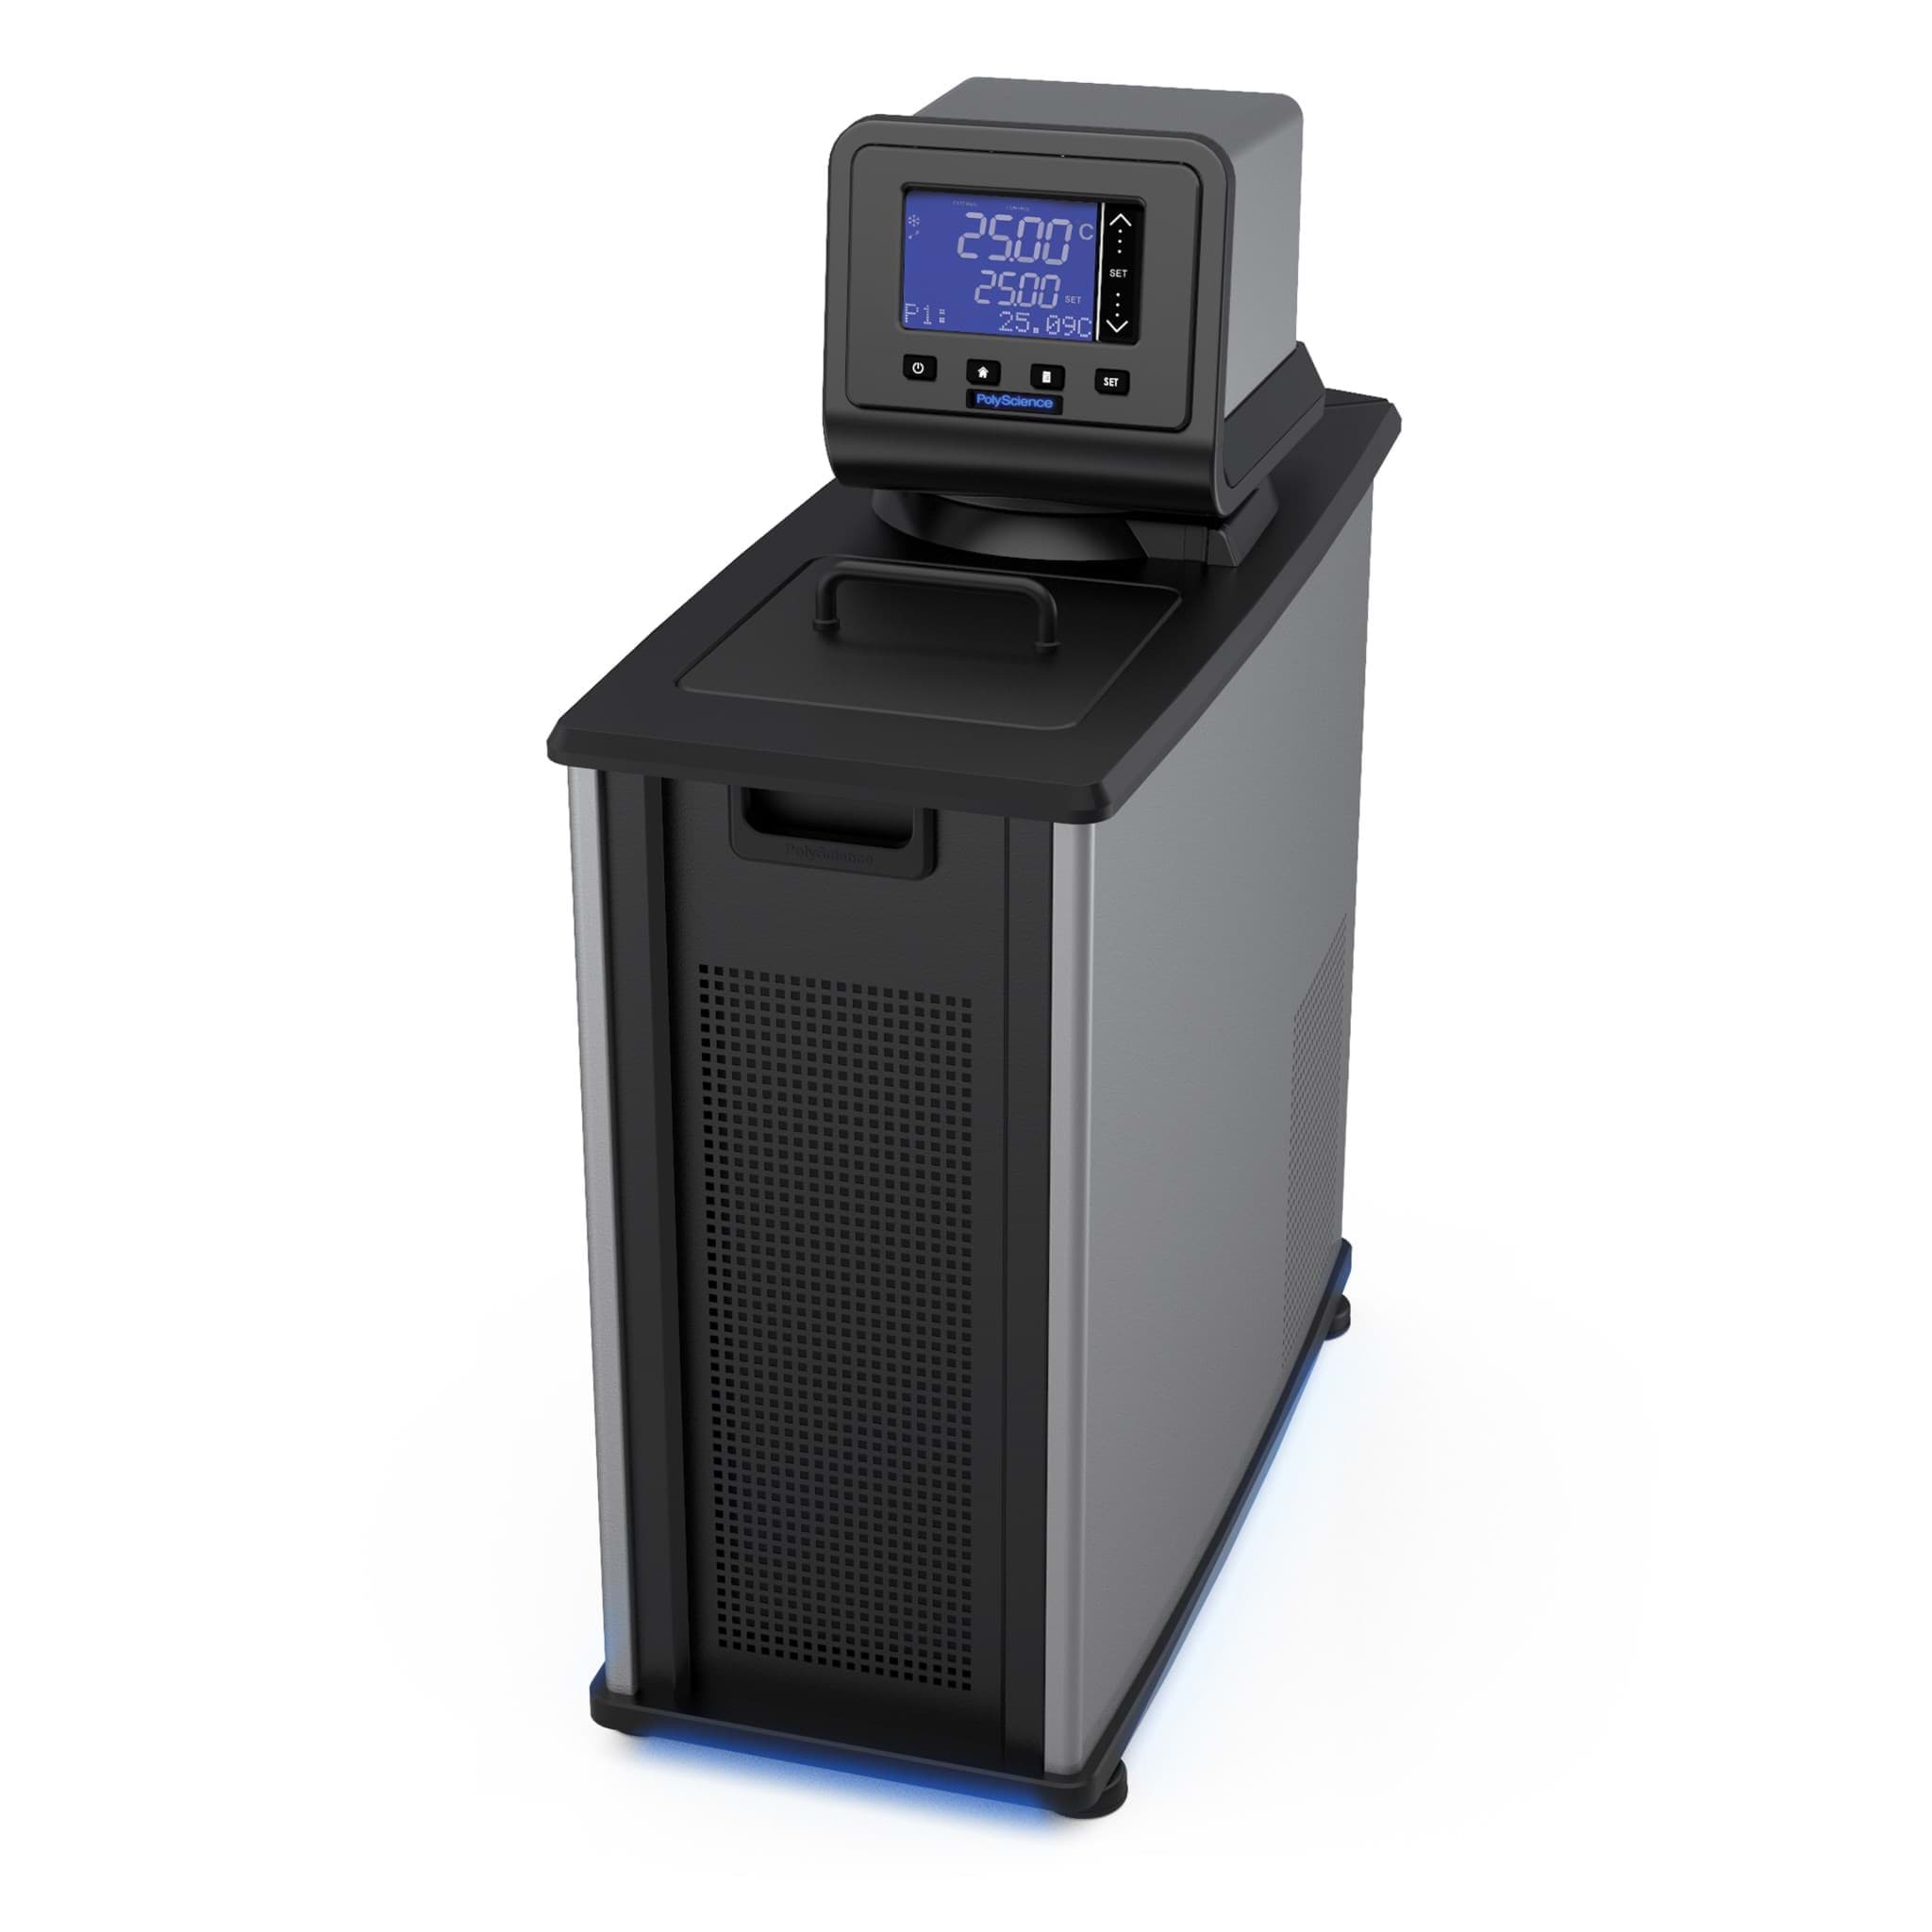 Picture of PolyScience 7L Space-Saving Refrigerated Circulator, Advanced Digital Controller (-20° to 200°C), 120V, 60Hz